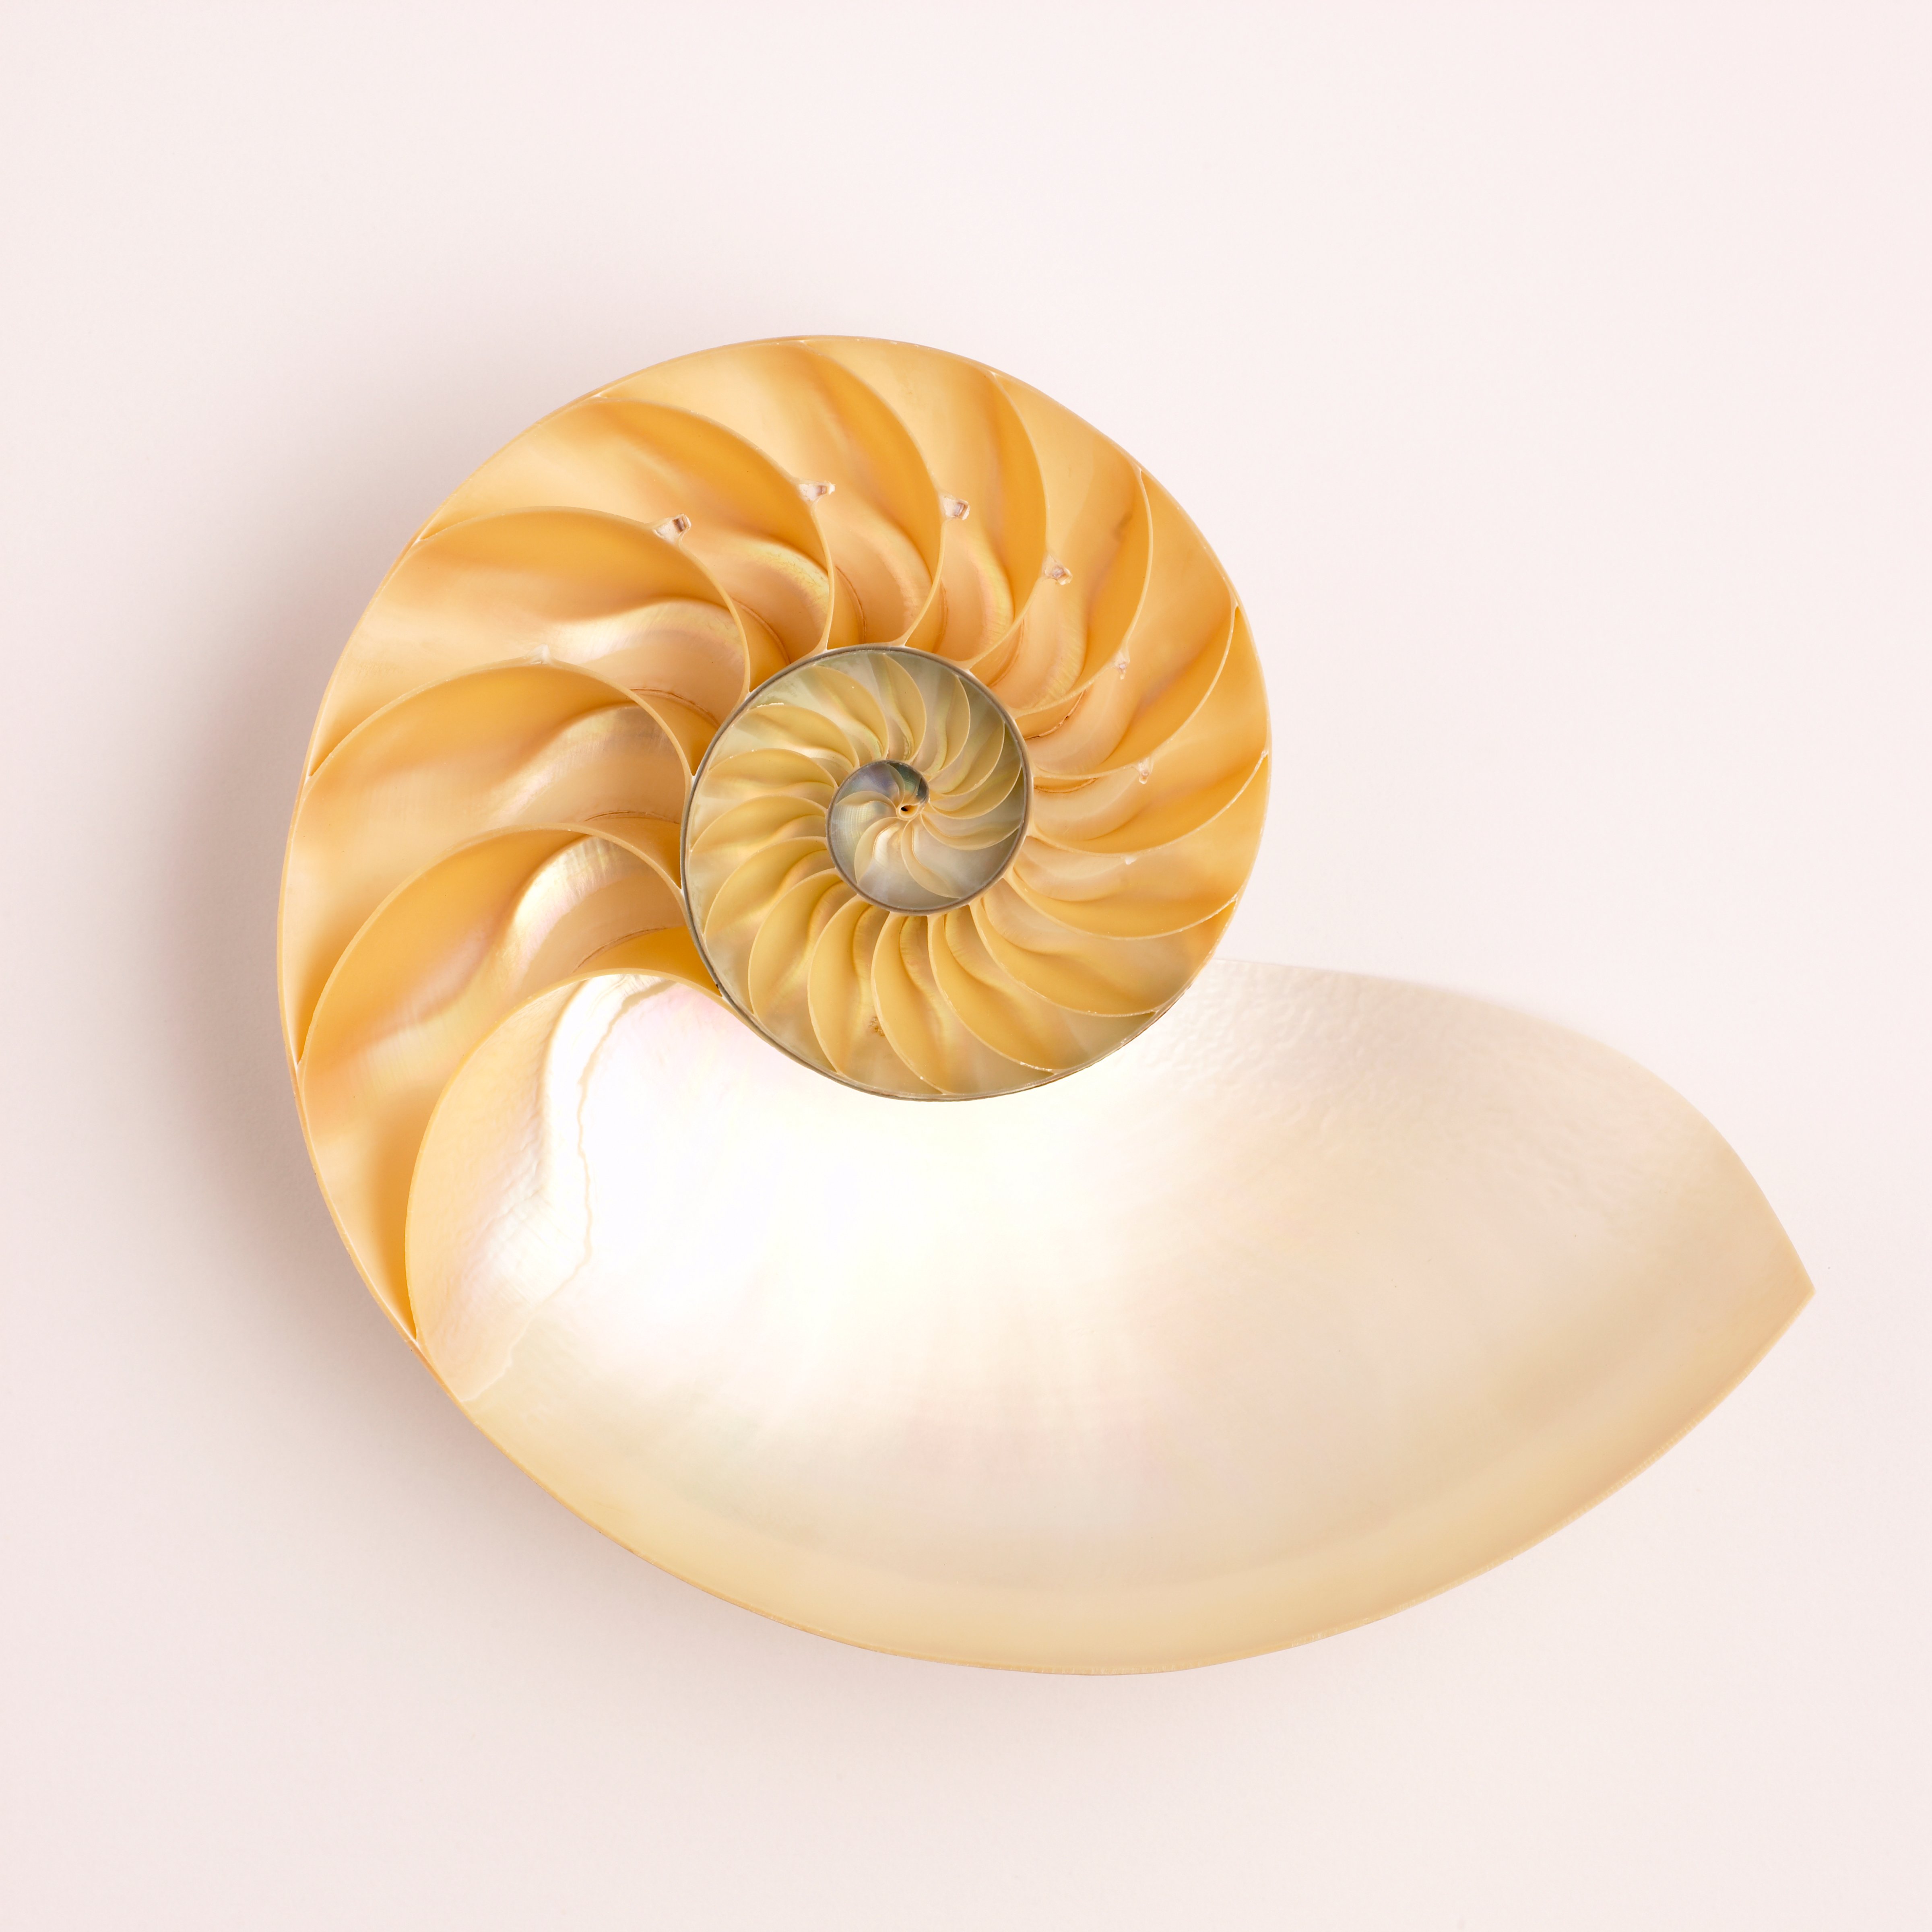 Nautilus Shell. (ALEAIMAGE—Getty Images)